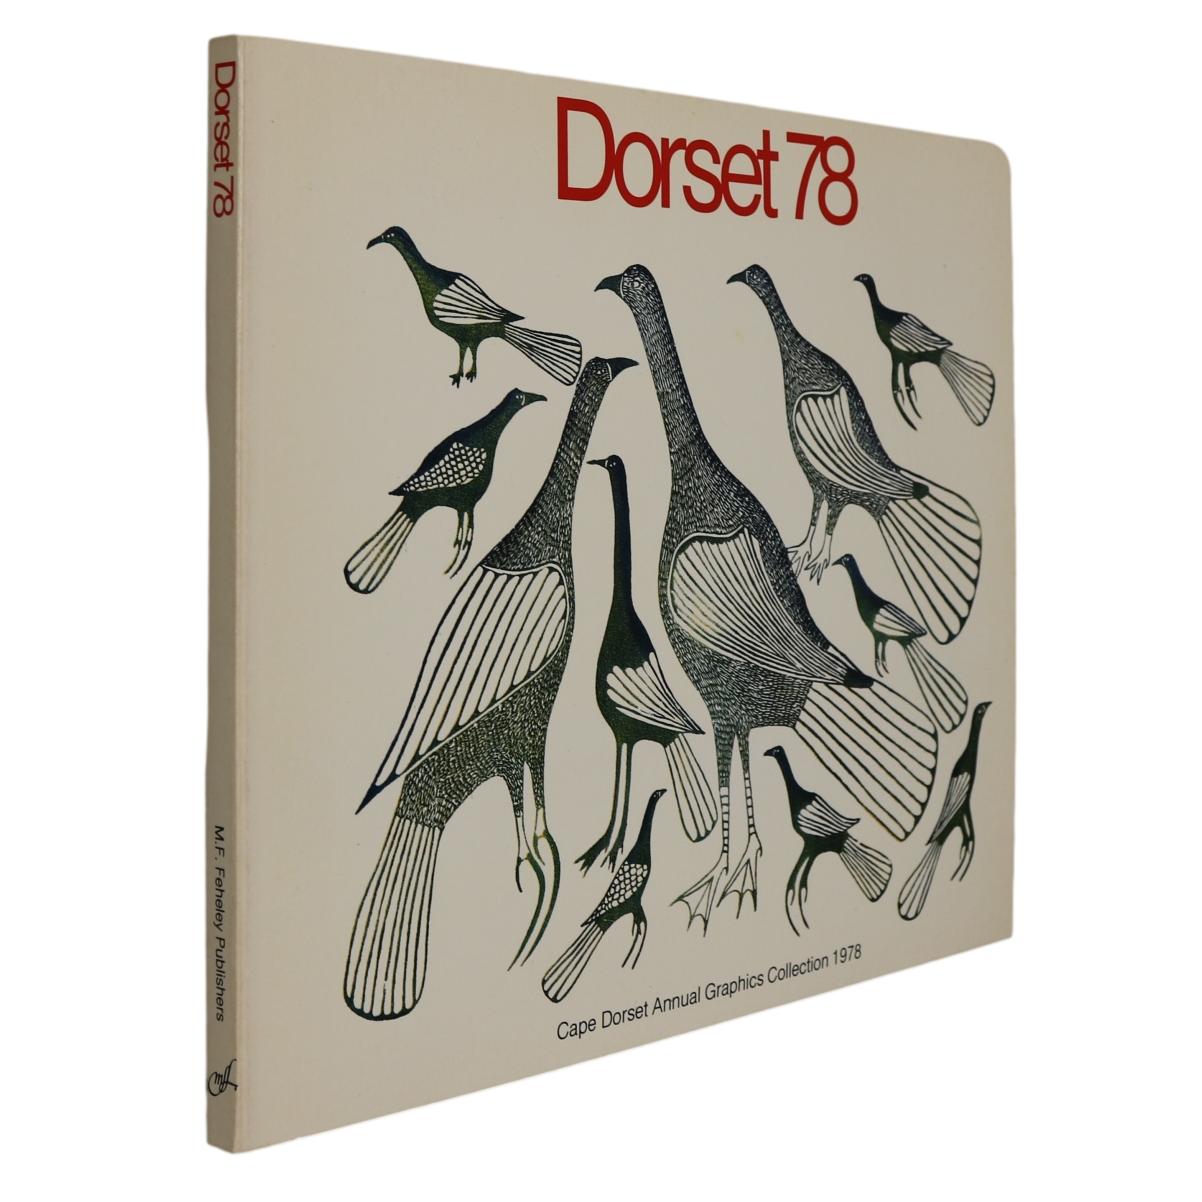 Dorset 78 Annual Graphics Collection Art Indigenous Printmaking Used Book